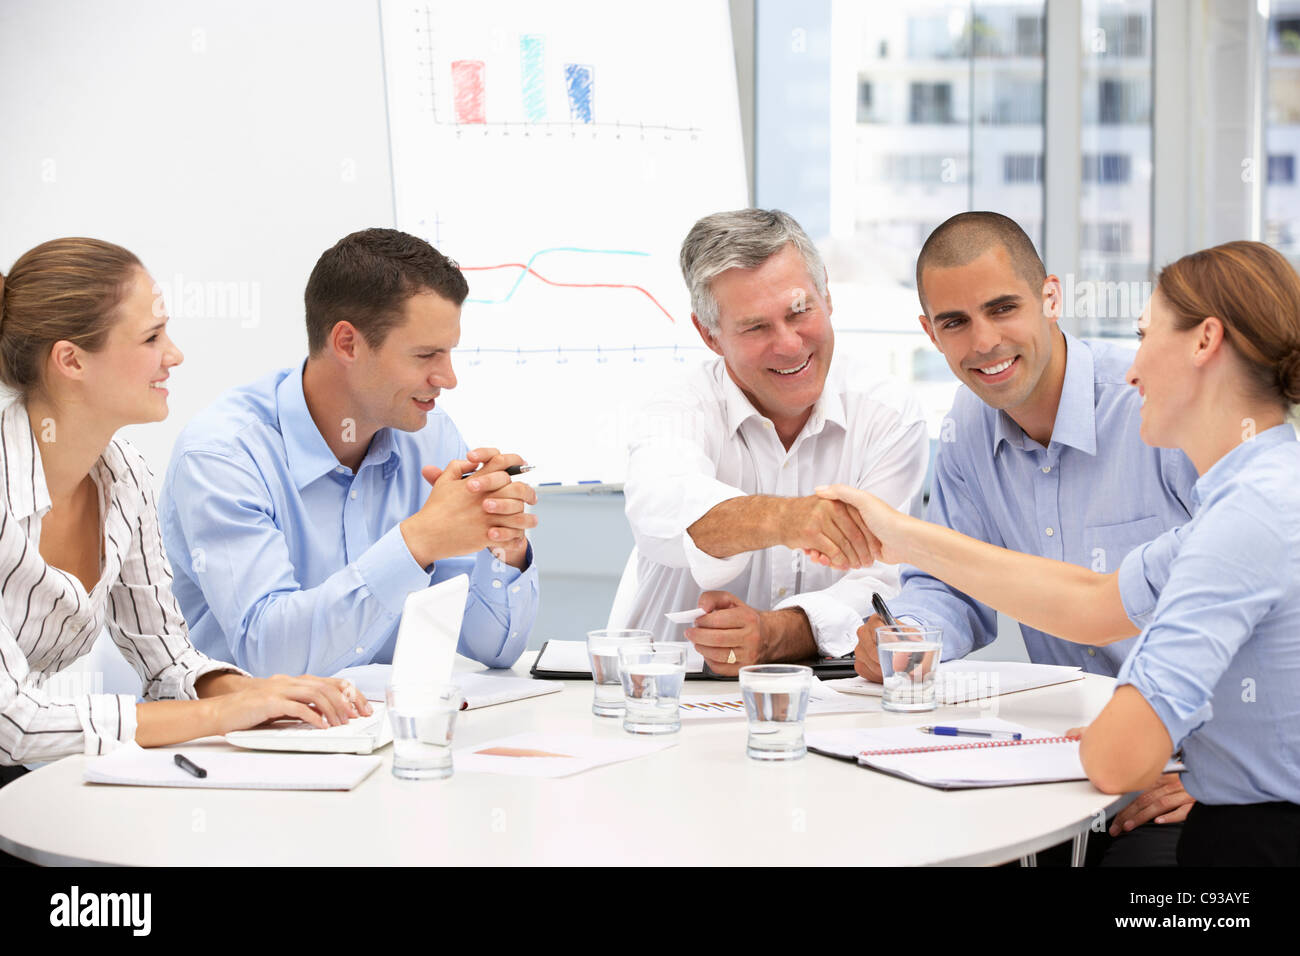 Business people in meeting Stock Photo